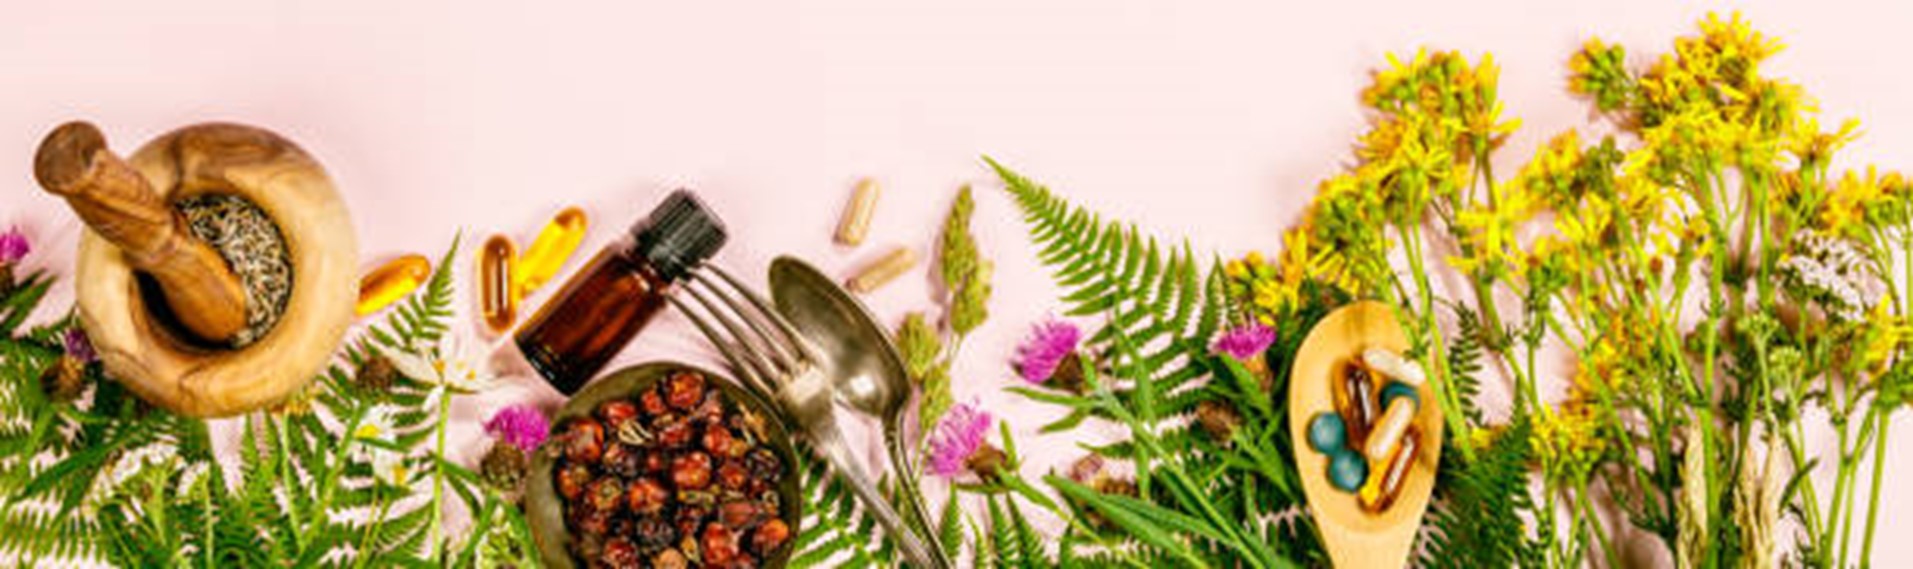 Natural herbs and products